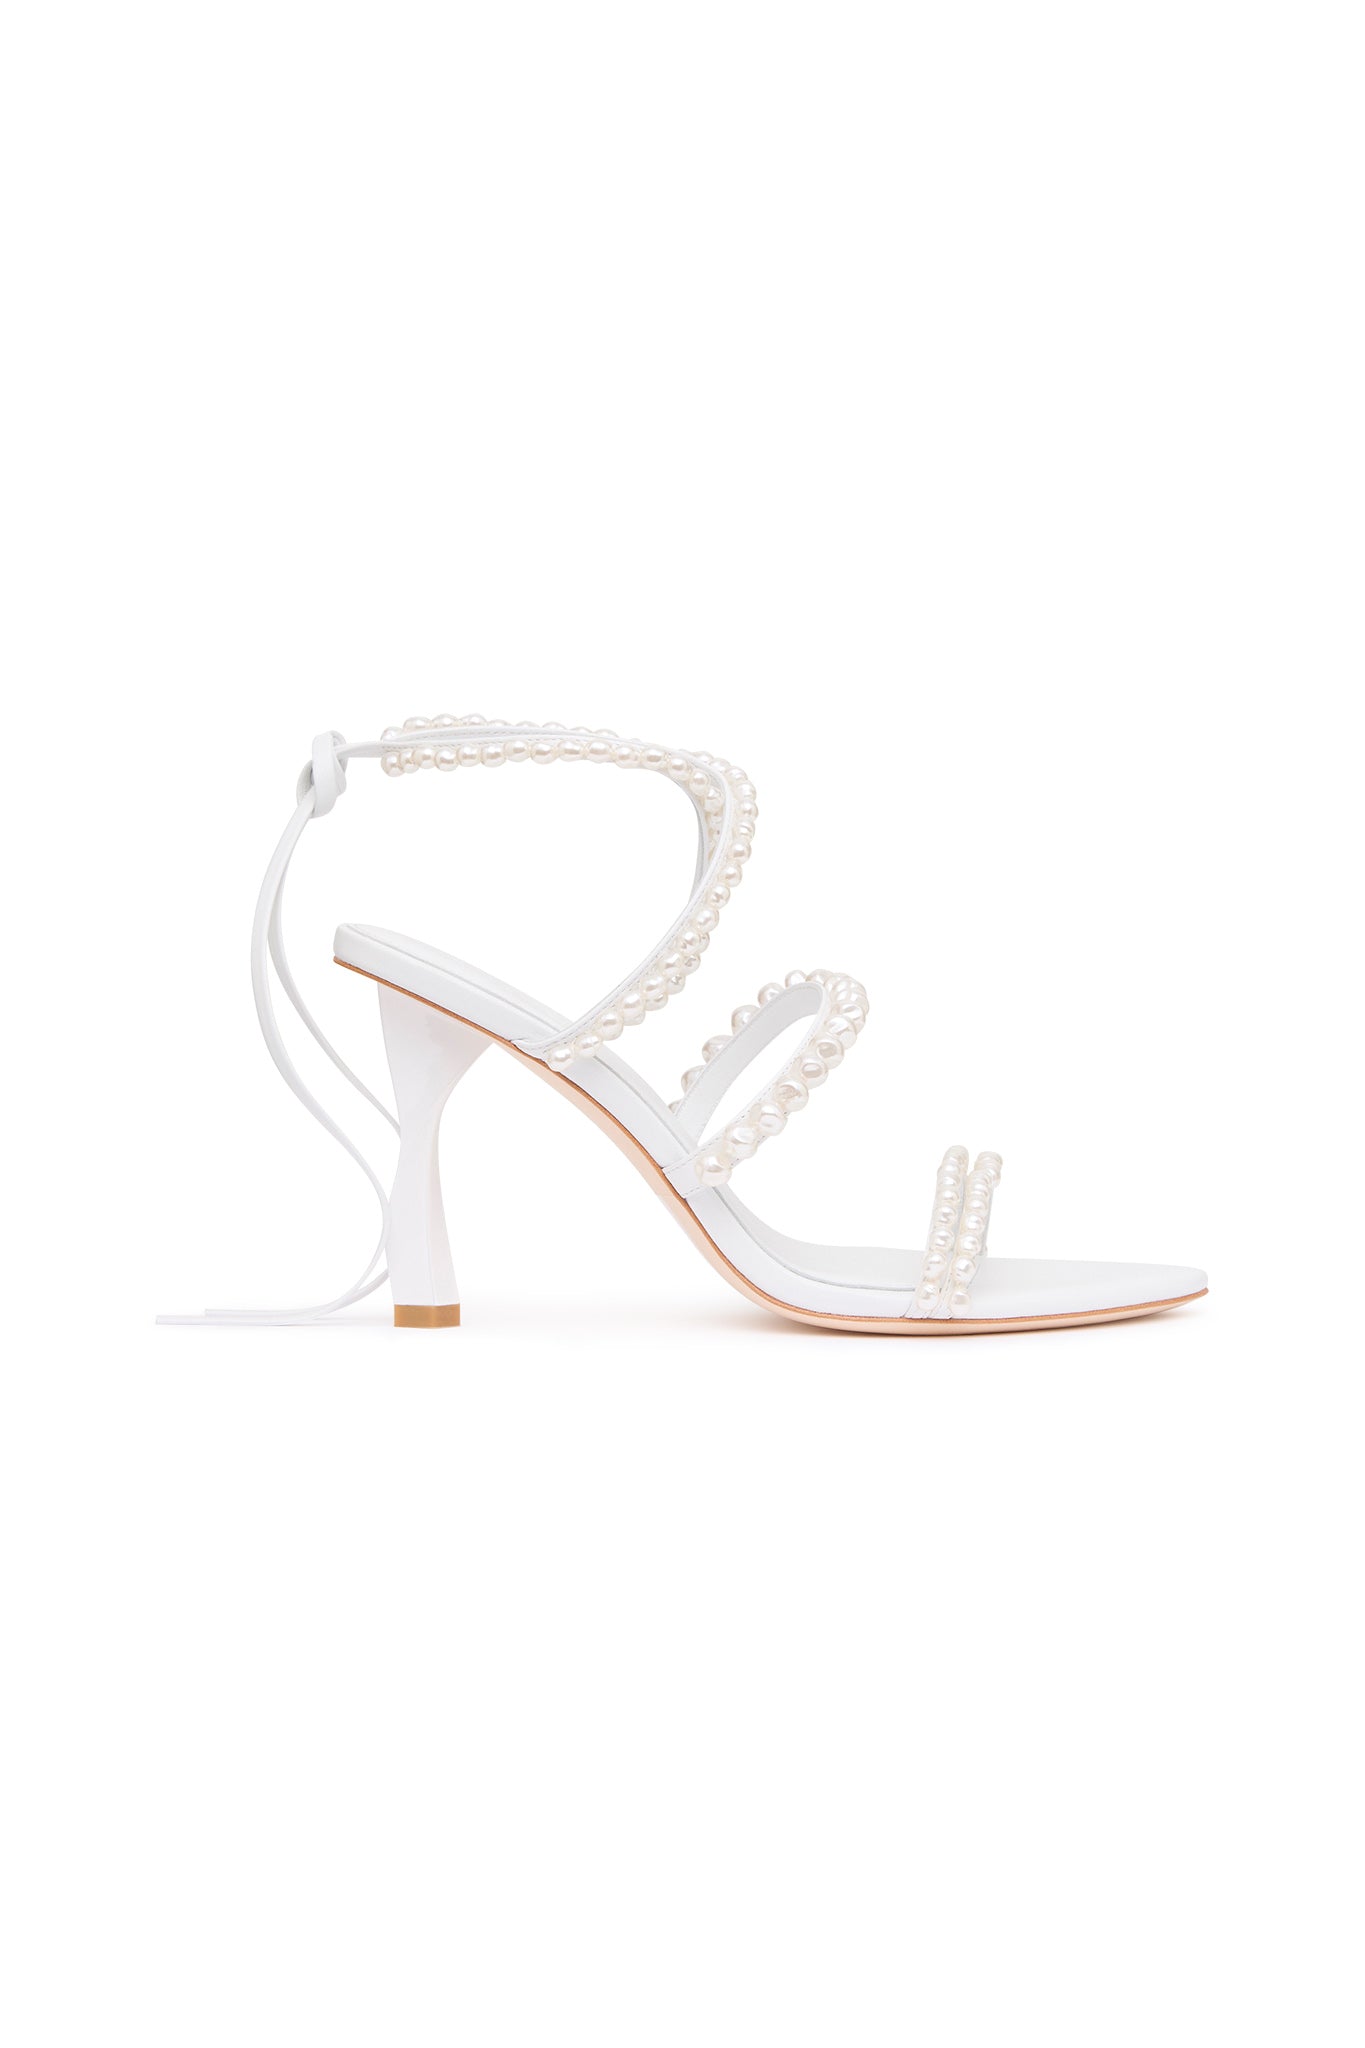 Capone Low Heel Chic Daily Women White Sandals | caponeoutfitters.com